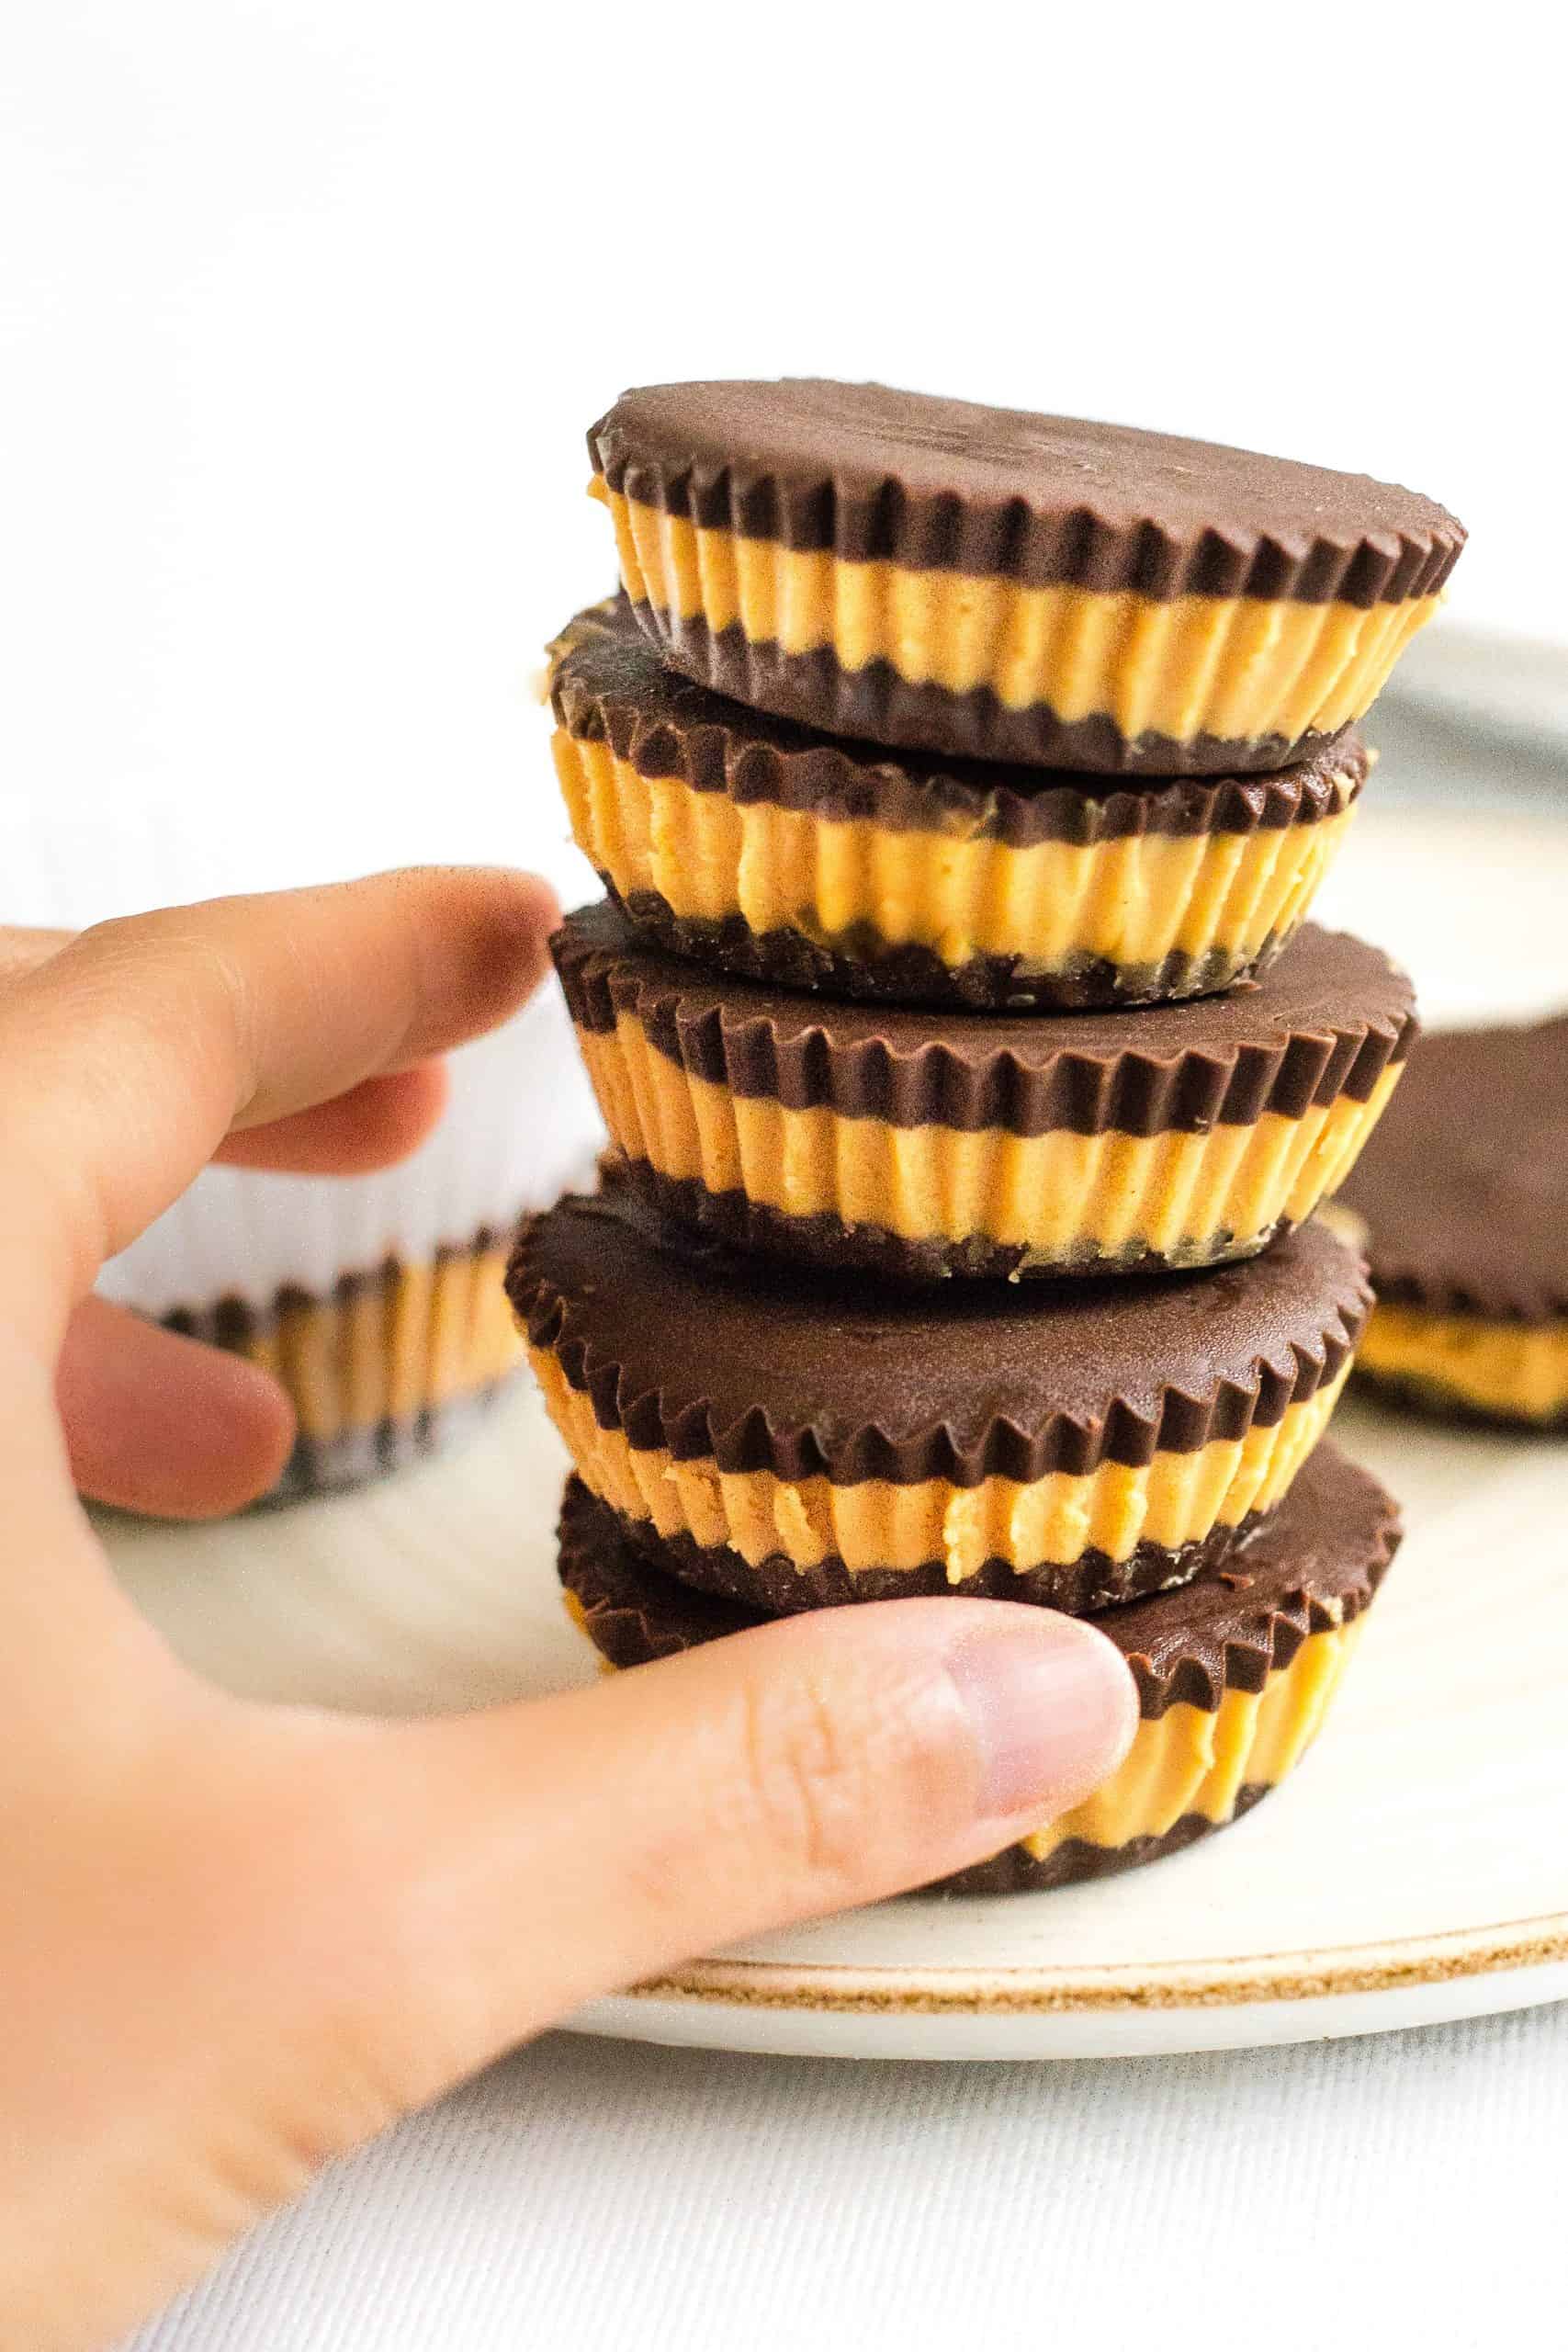 Hand reaching for a stack of peanut butter cups.